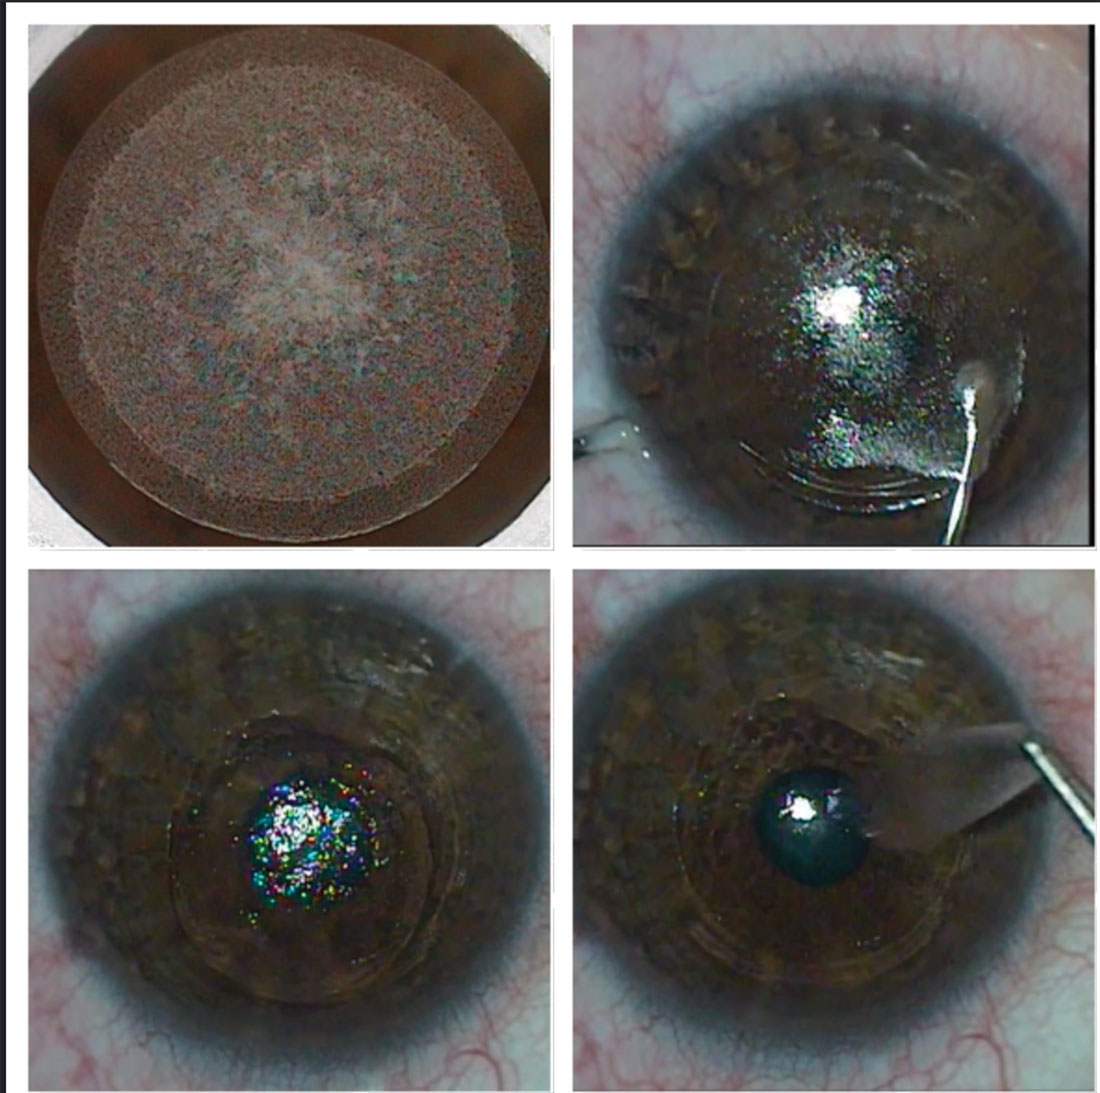 SMILE’s smaller corneal incision is presumed to offer greater post-op stability than LASIK. At least by some measures of corneal integrity, that was not borne out in a recent meta-analysis.